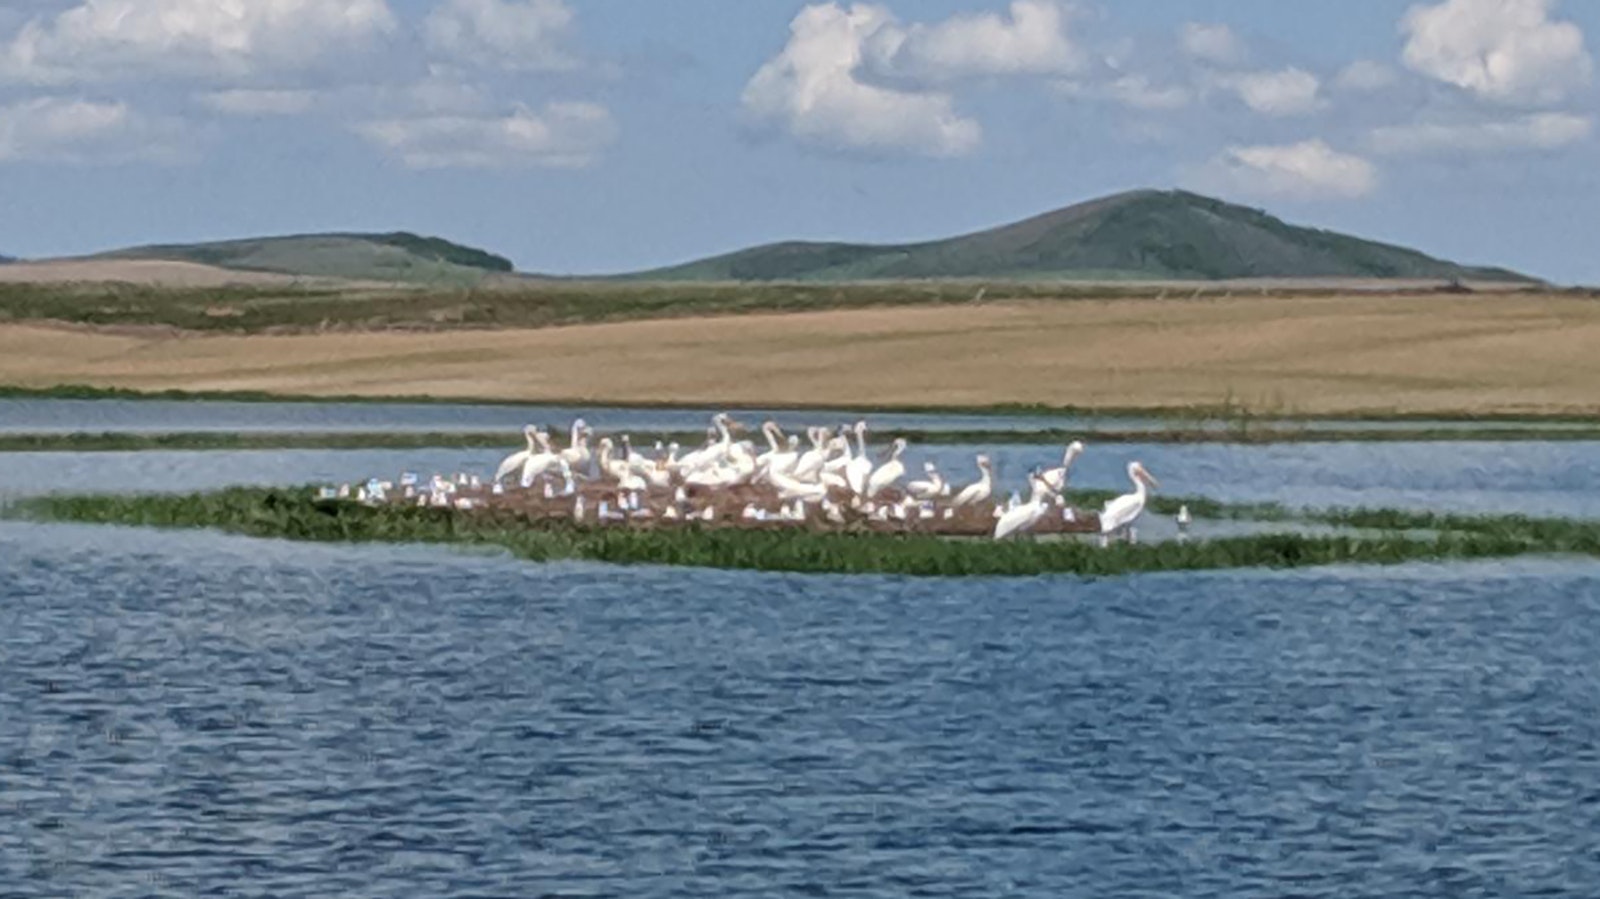 Colonies of pelicans nest on islands in Blackfoot Reservoir in Idaho, not far from the Wyoming state line. The birds have been gobbling prize Yellowstone cutthroat trout form the reservoir and adjoining river system.